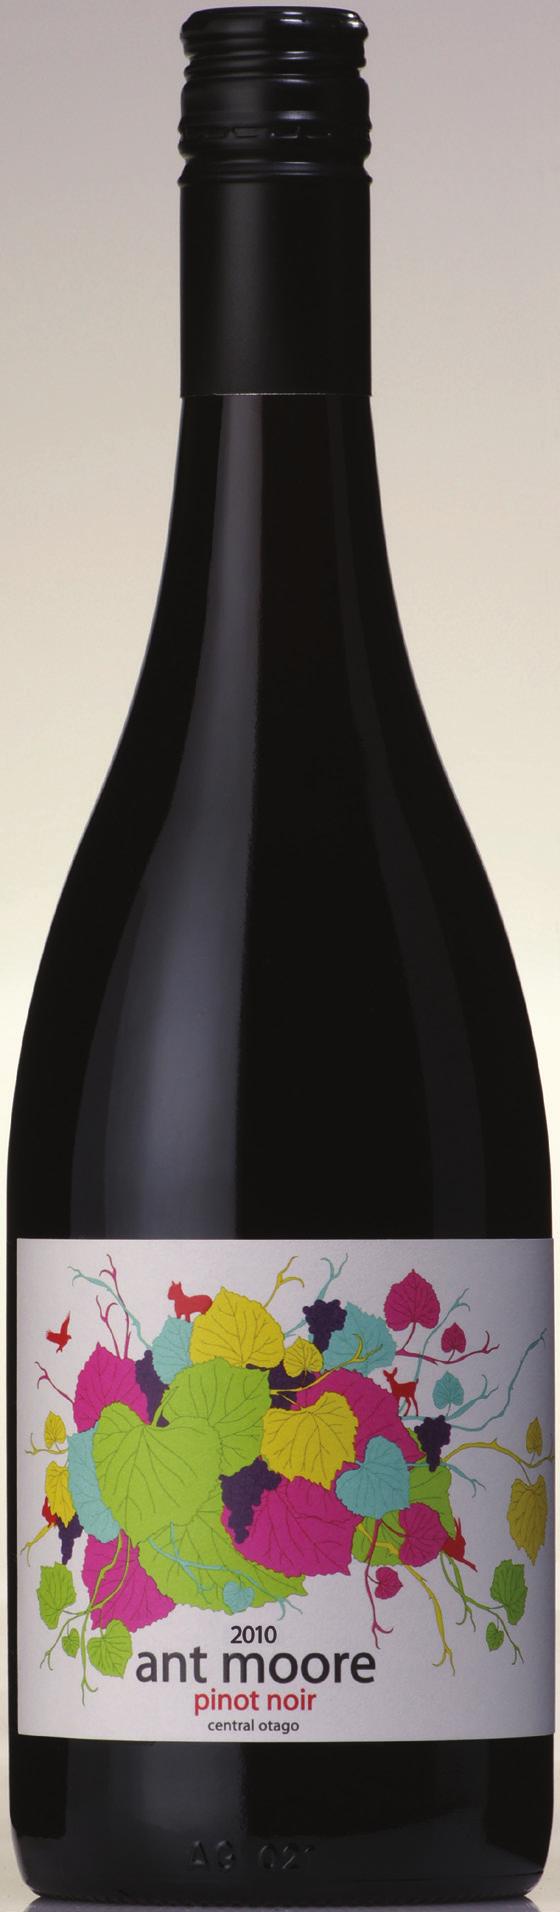 2010 ant pinot noir central otago Ant Moore Pinot Noir VINTAGE: 2010 GRAPES: Pinot Noir 2 tonne/acre Percentage: 100% ORIGIN OF GRAPES: Central Otago, New Zealand Percentage: 100% 2010 was an